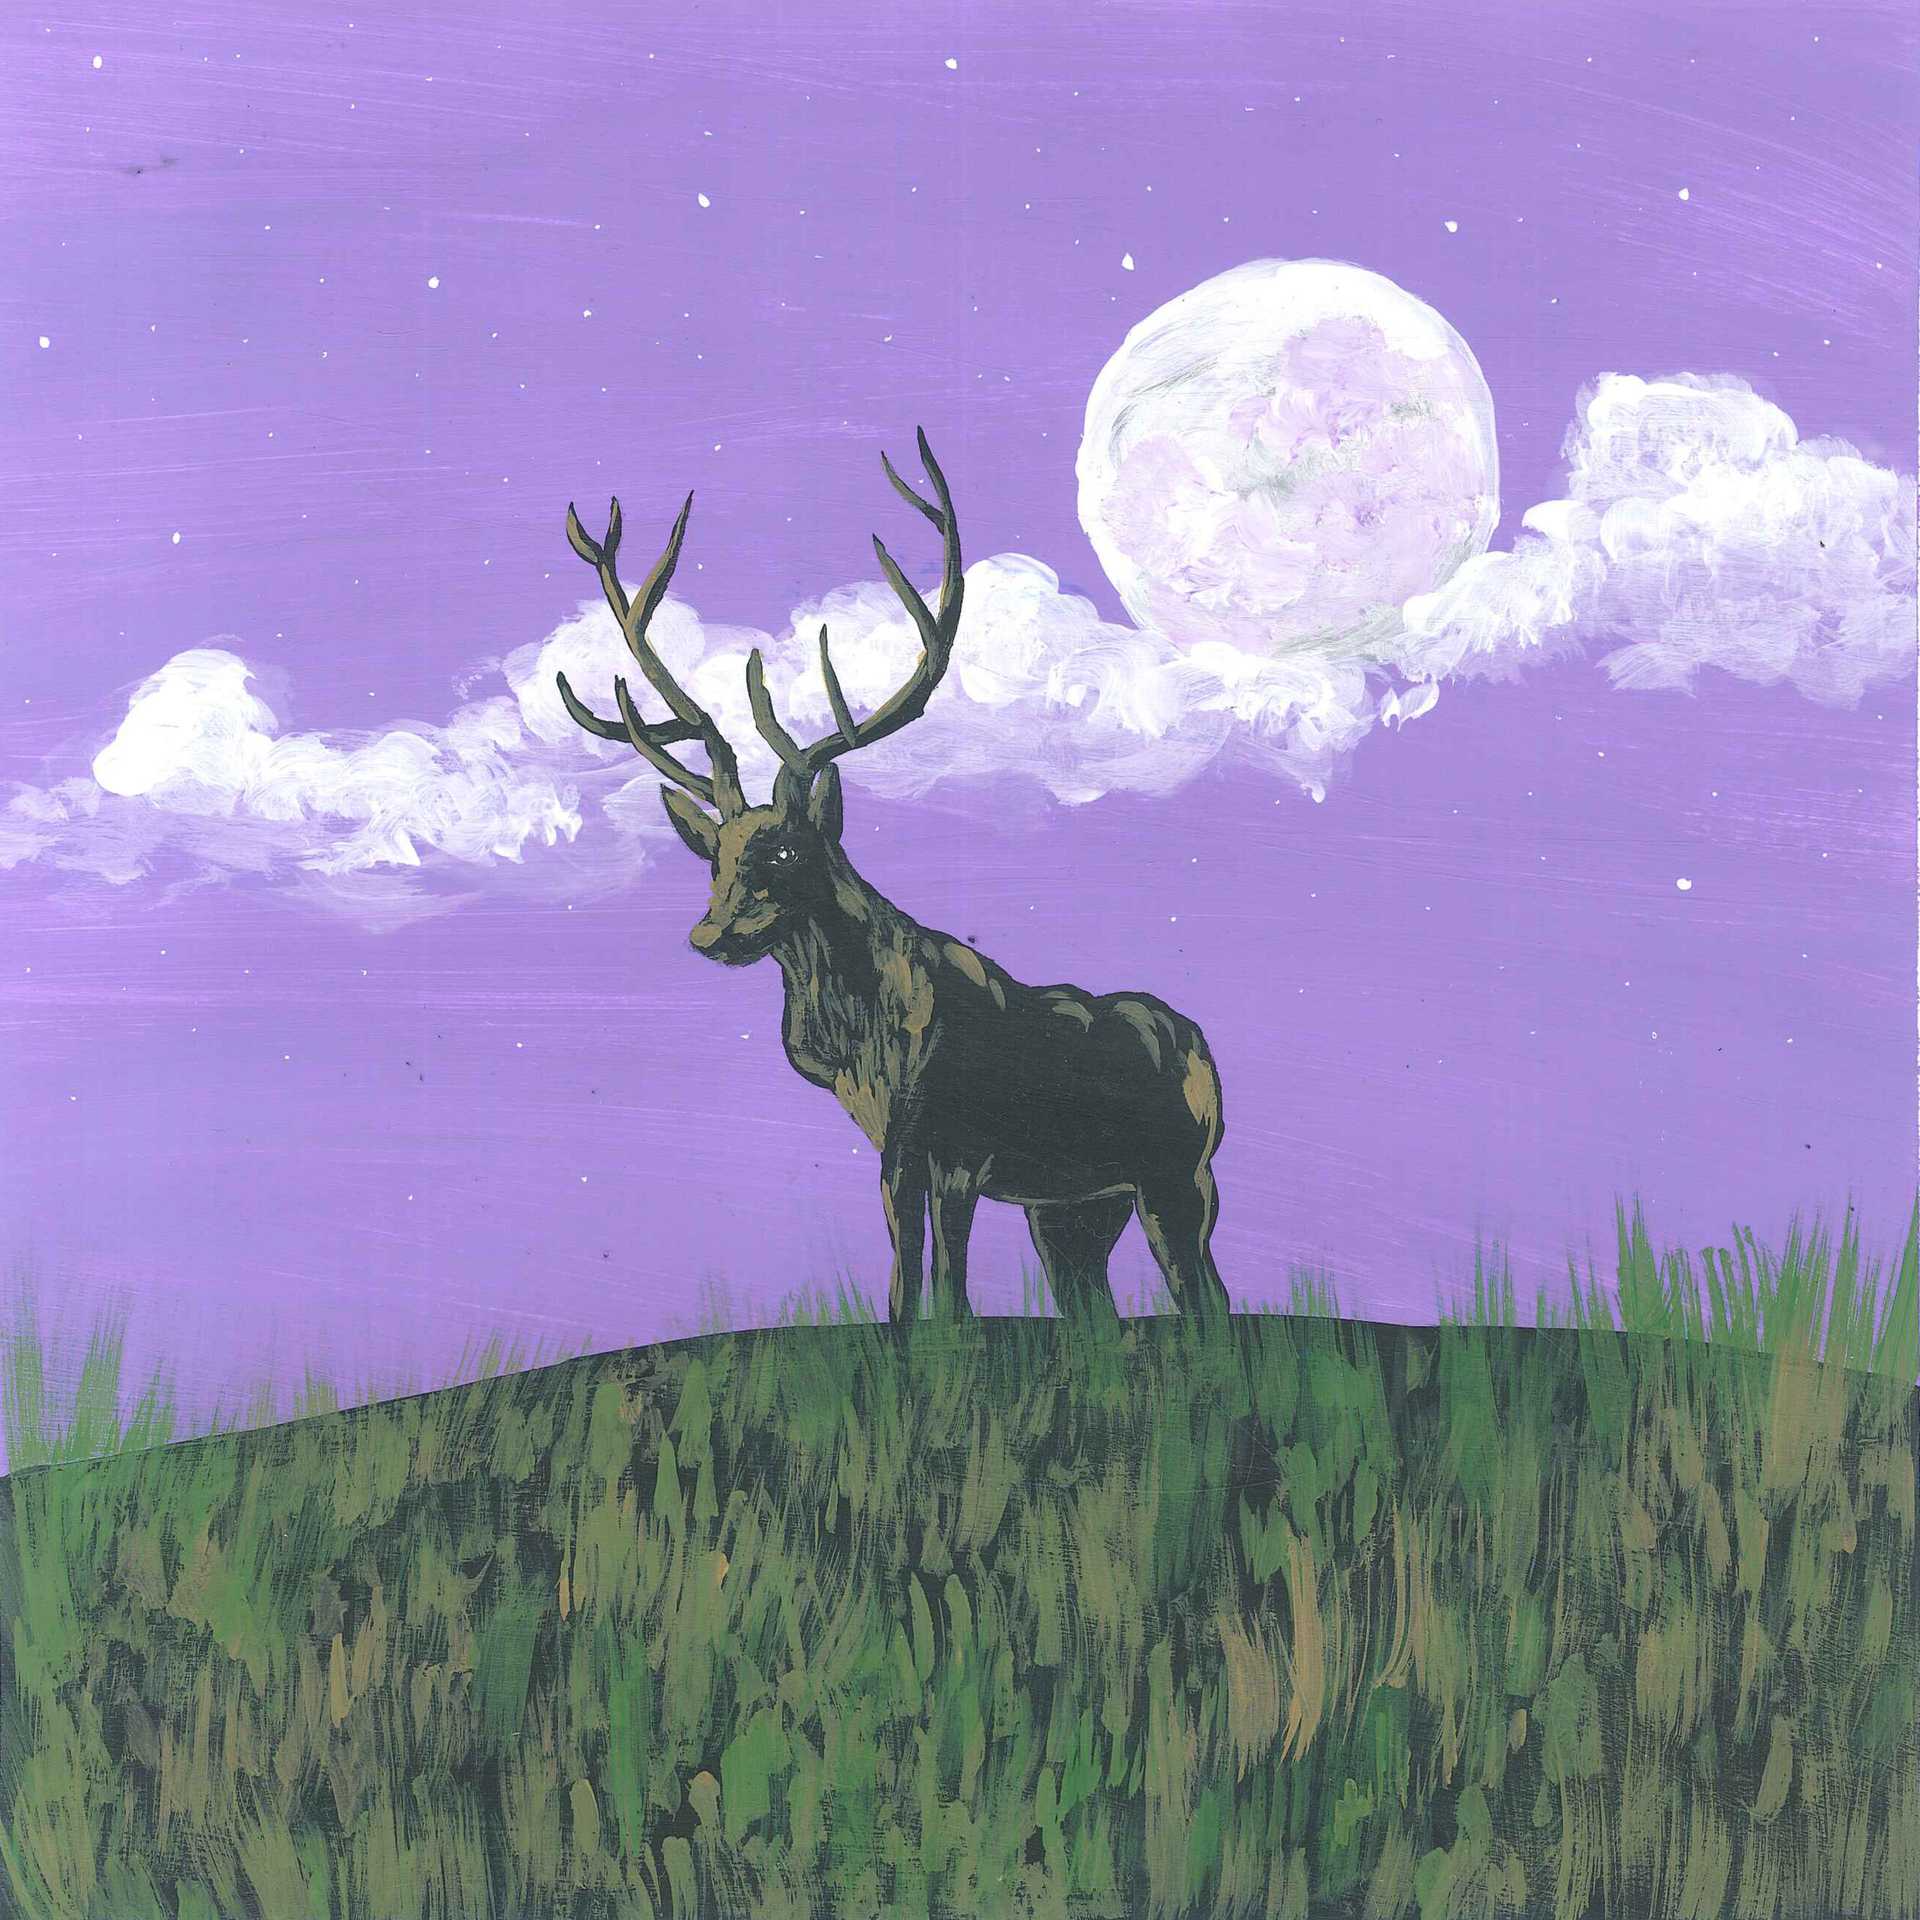 Intense Red Deer Rutting Through the Forest - earth.fm